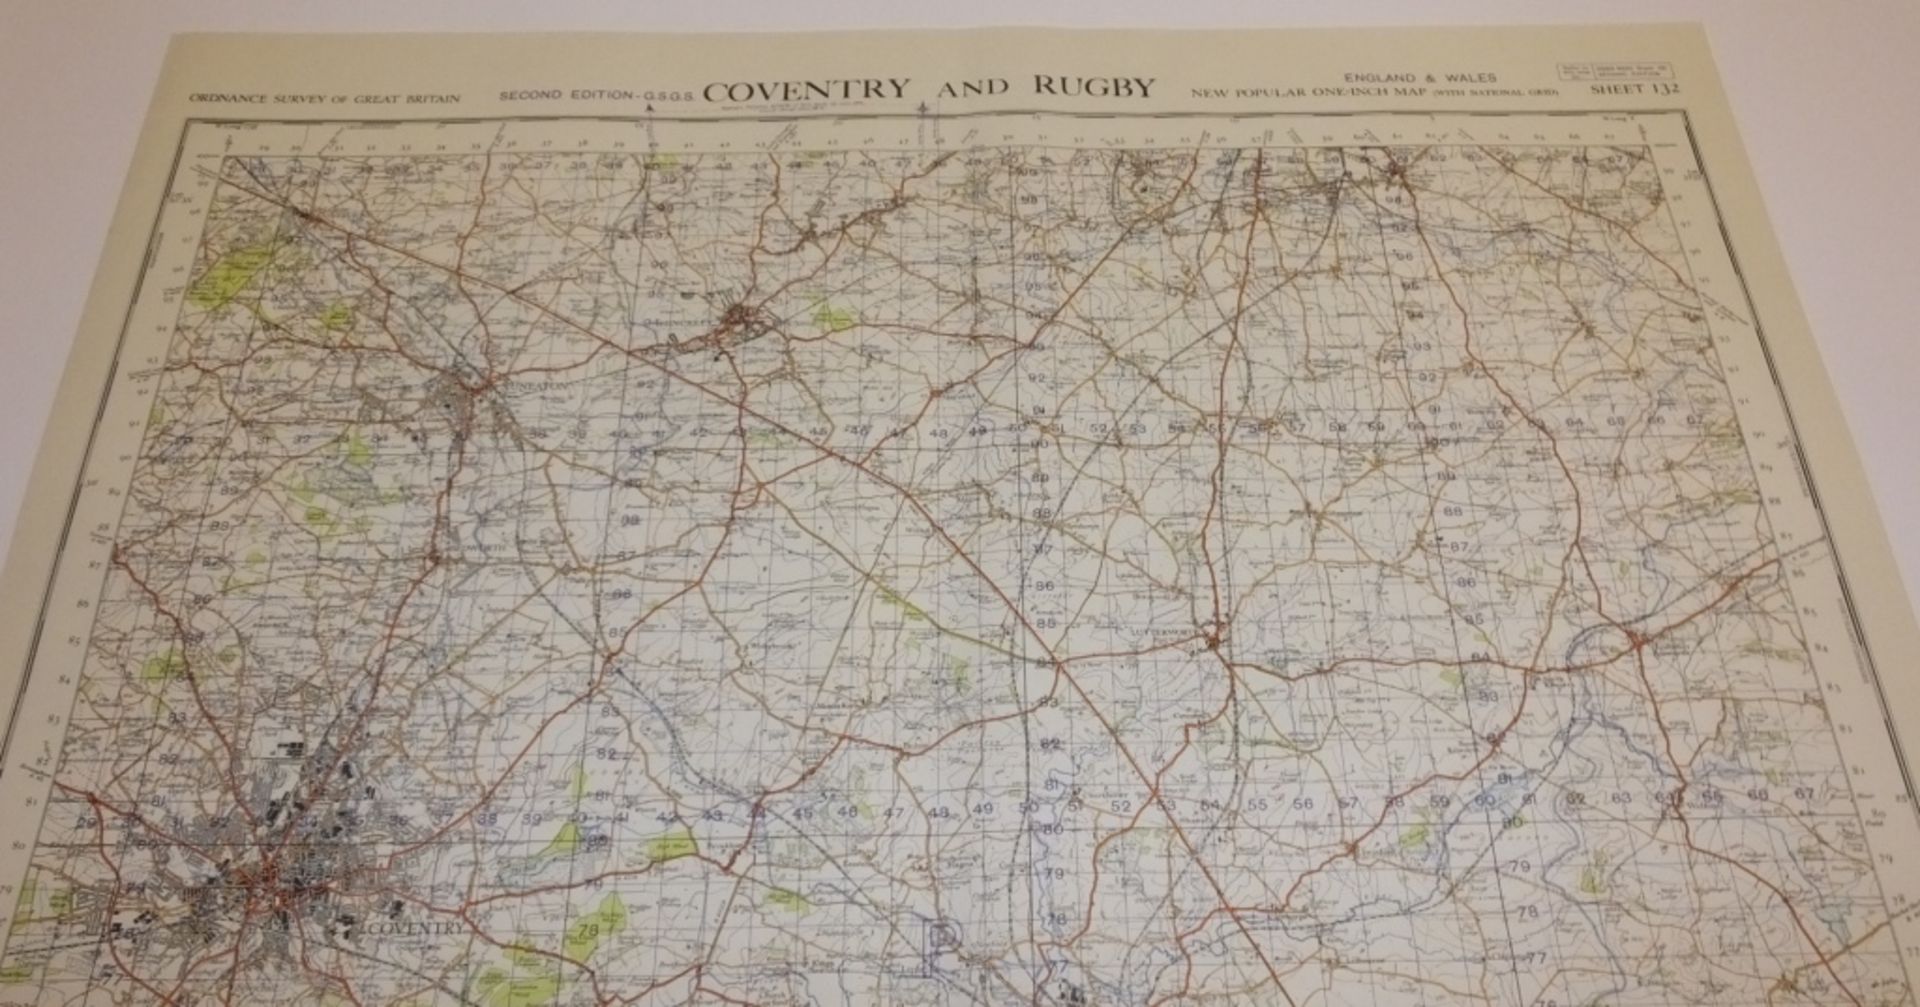 18x ENGLAND & WALES MAP COVENTRY RUENGLAND & WALESY 1INCH 1MILE 1952 2ND EDITION 4620GSGS - Image 3 of 5